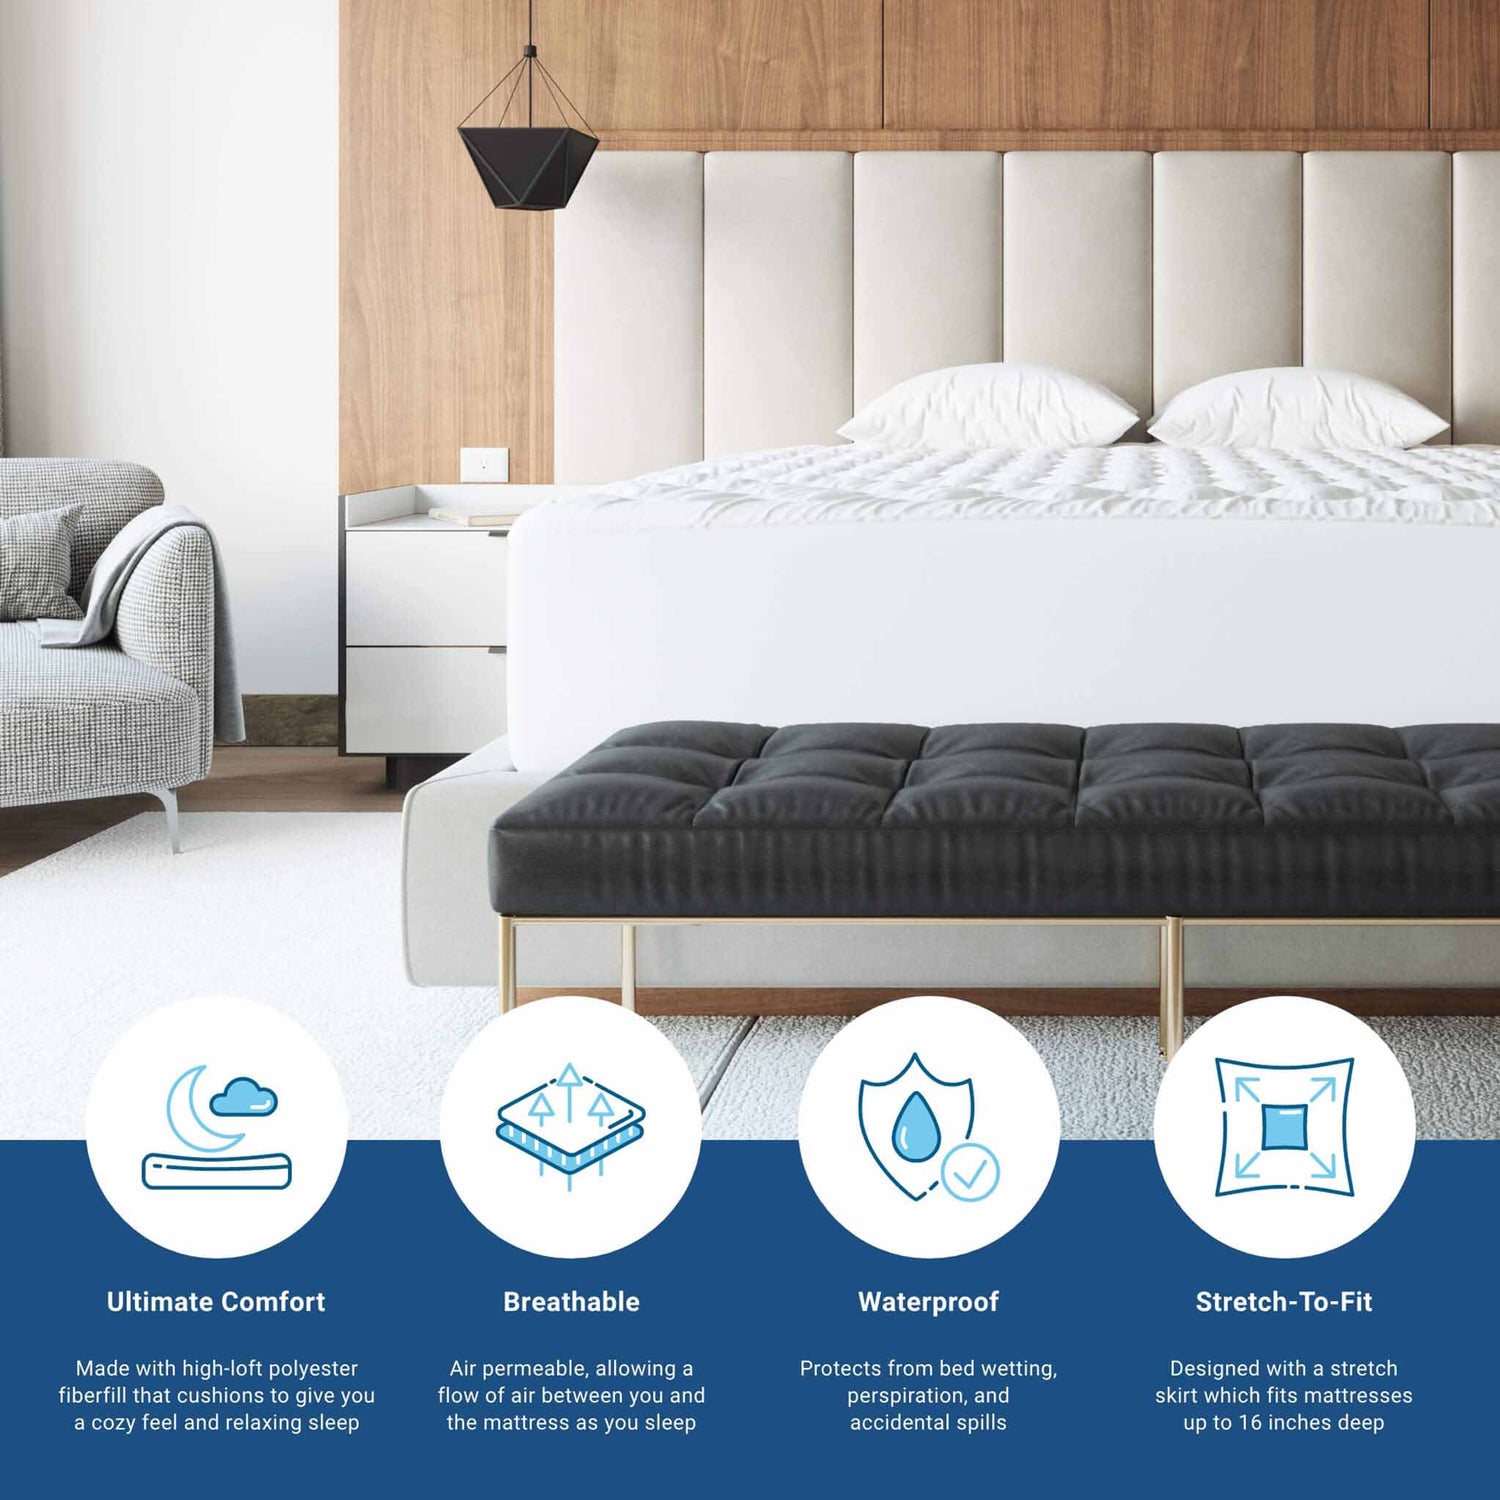 Waterproof Mattress Pad - Our deluxe quilted waterproof mattress pad doesn’t crinkle or make noise and adds extra padding to your mattress to make it even more comfortable.